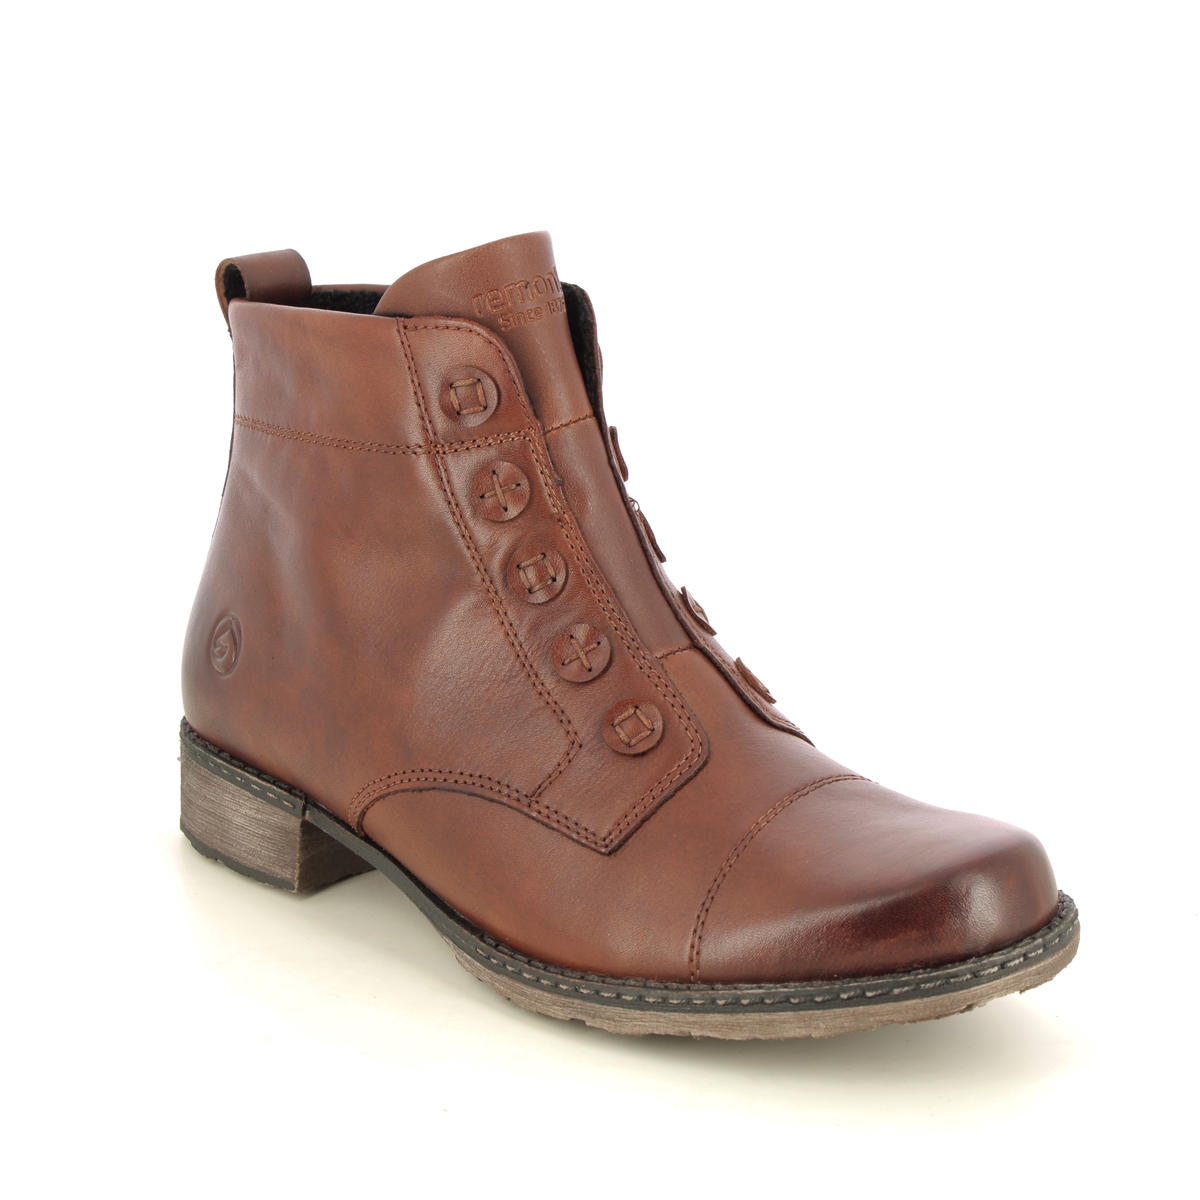 Remonte Peesibut Brown Leather Womens Ankle Boots D4392-22 In Size 38 In Plain Brown Leather